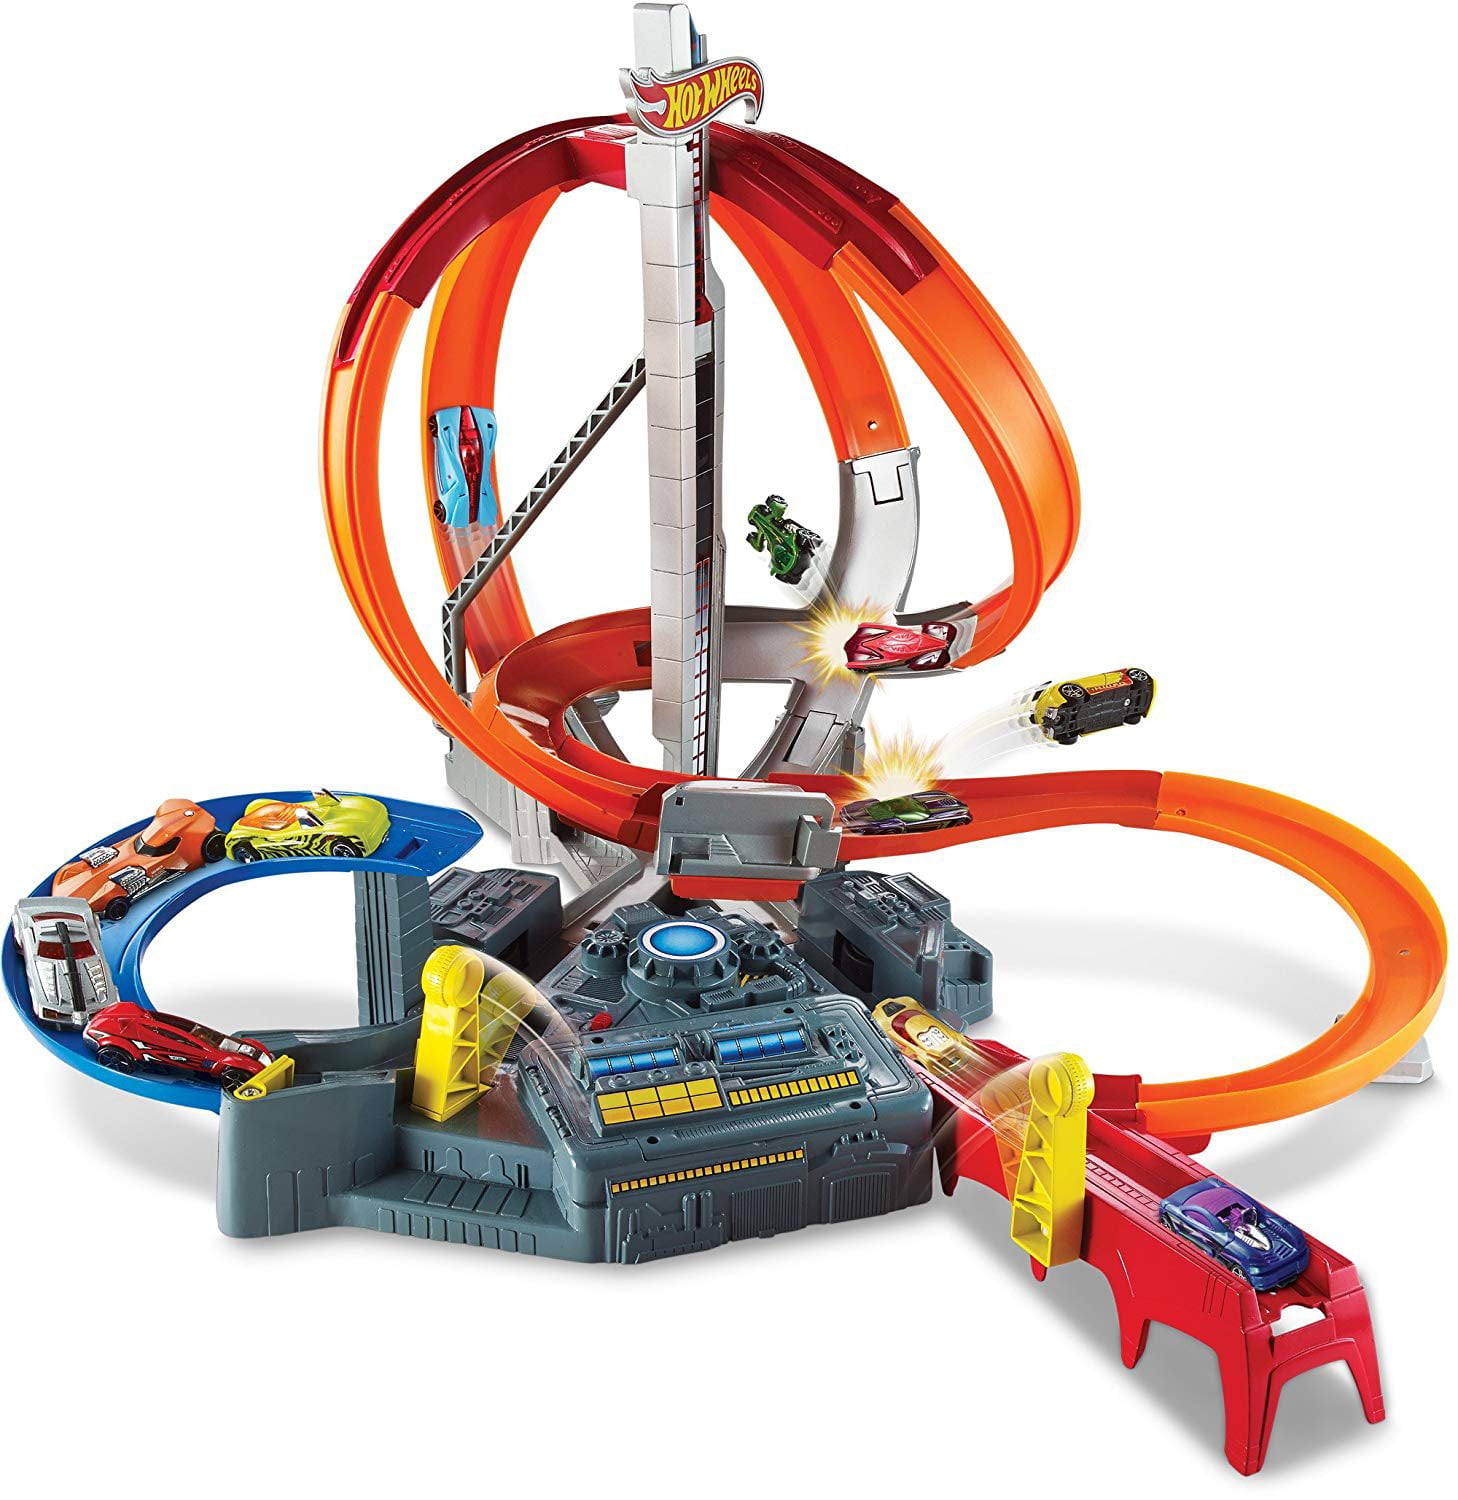 hot wheels spin storm playset